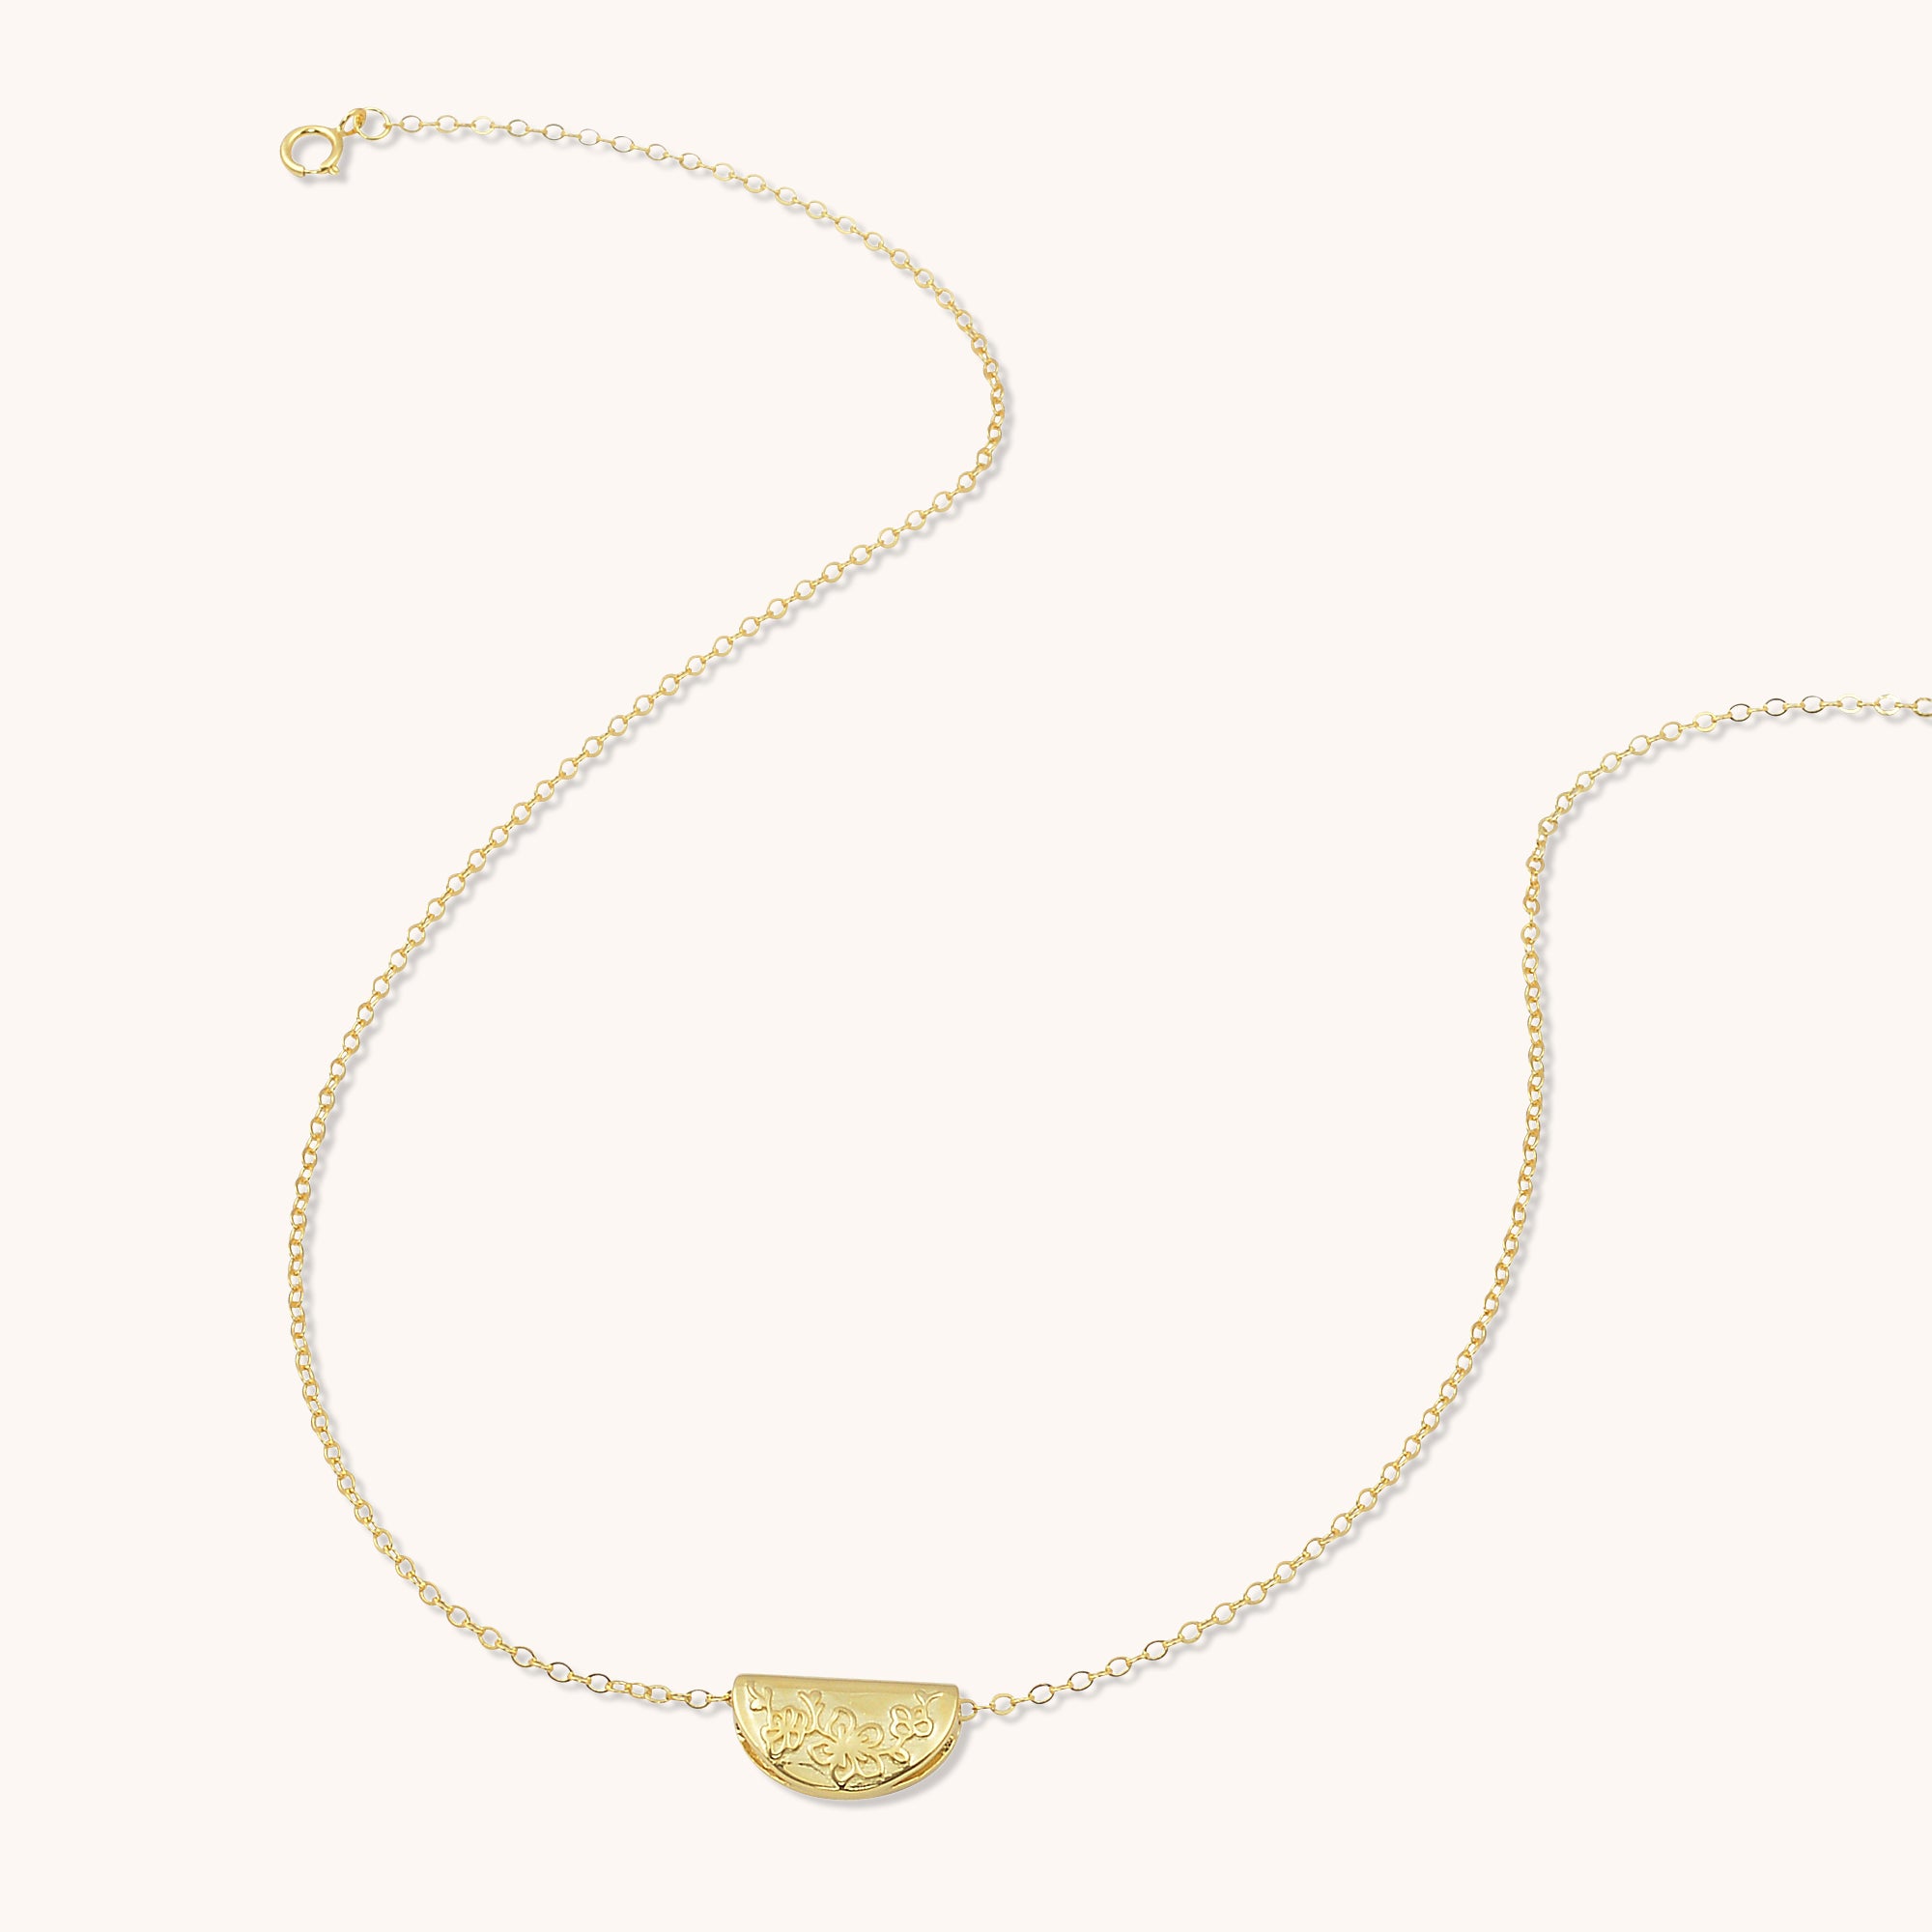 Birth Flower Necklace March (Cherry Blossom) Gold